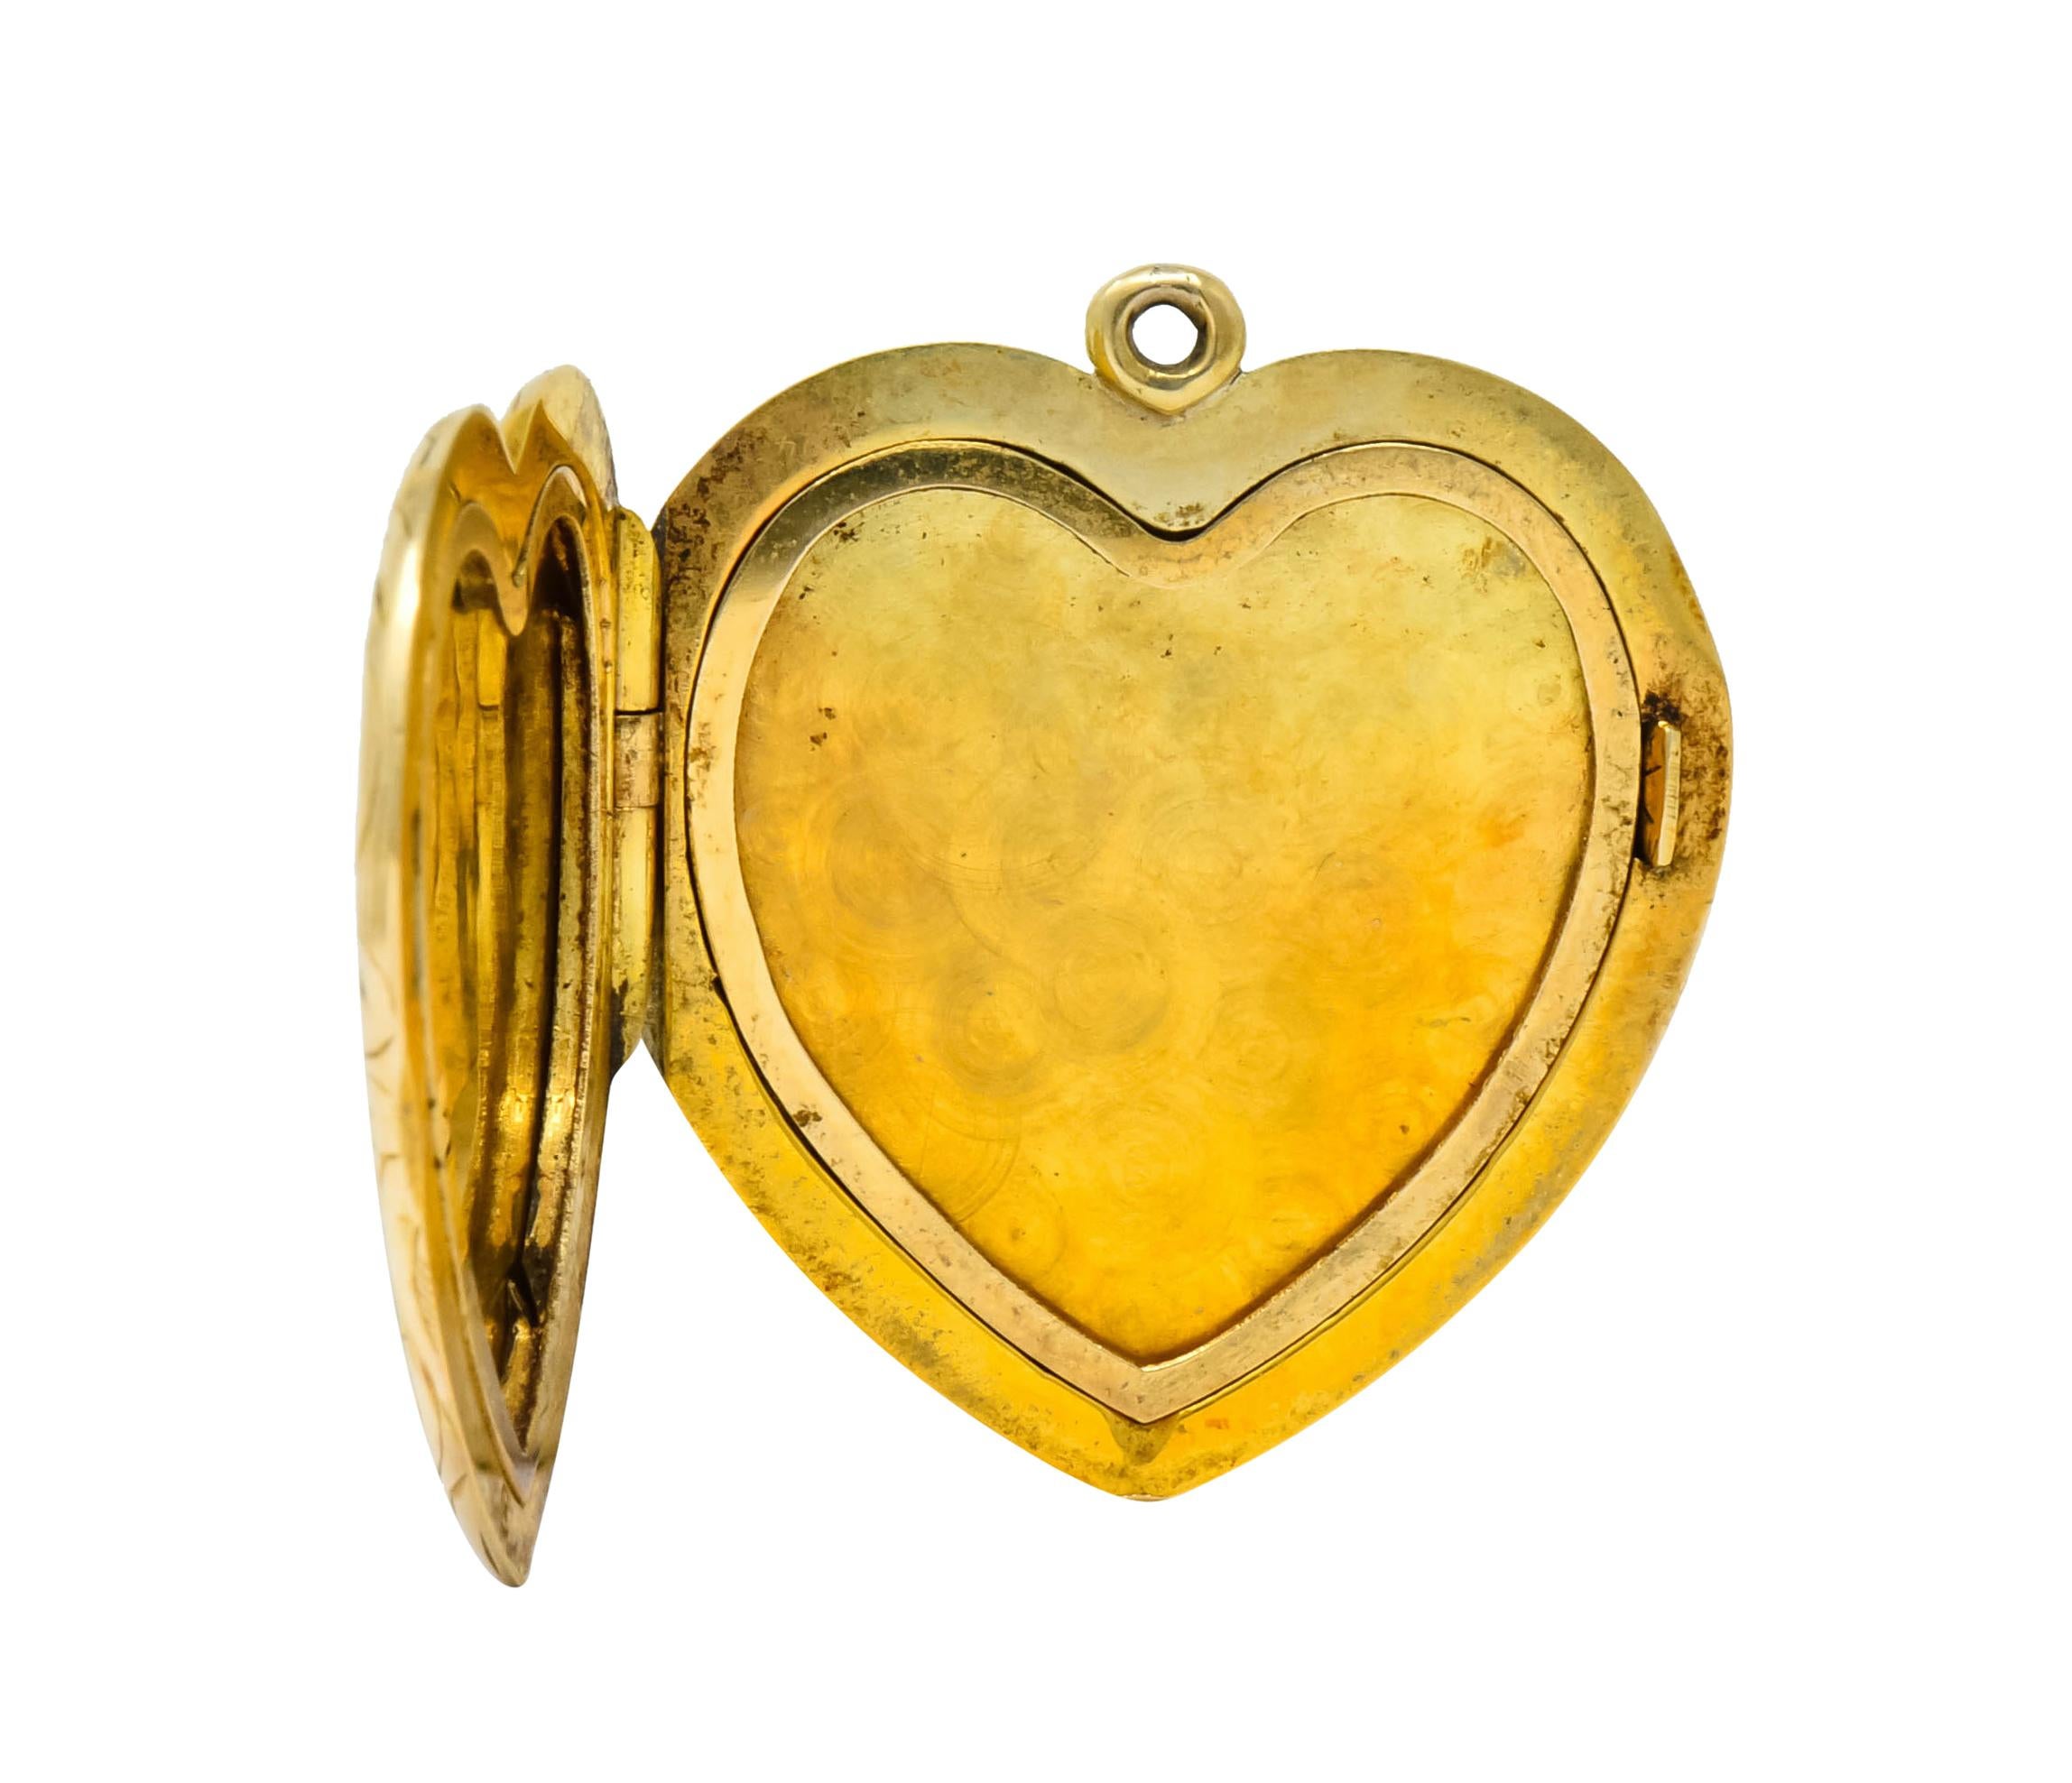 Locket designed as heart deeply engraved on front with scrolling foliate motif centering a stylized flower

Hinge opens to reveal two recessed areas with removable heart frames to hold keepsake in place

With maker's mark for Carrington Co. and